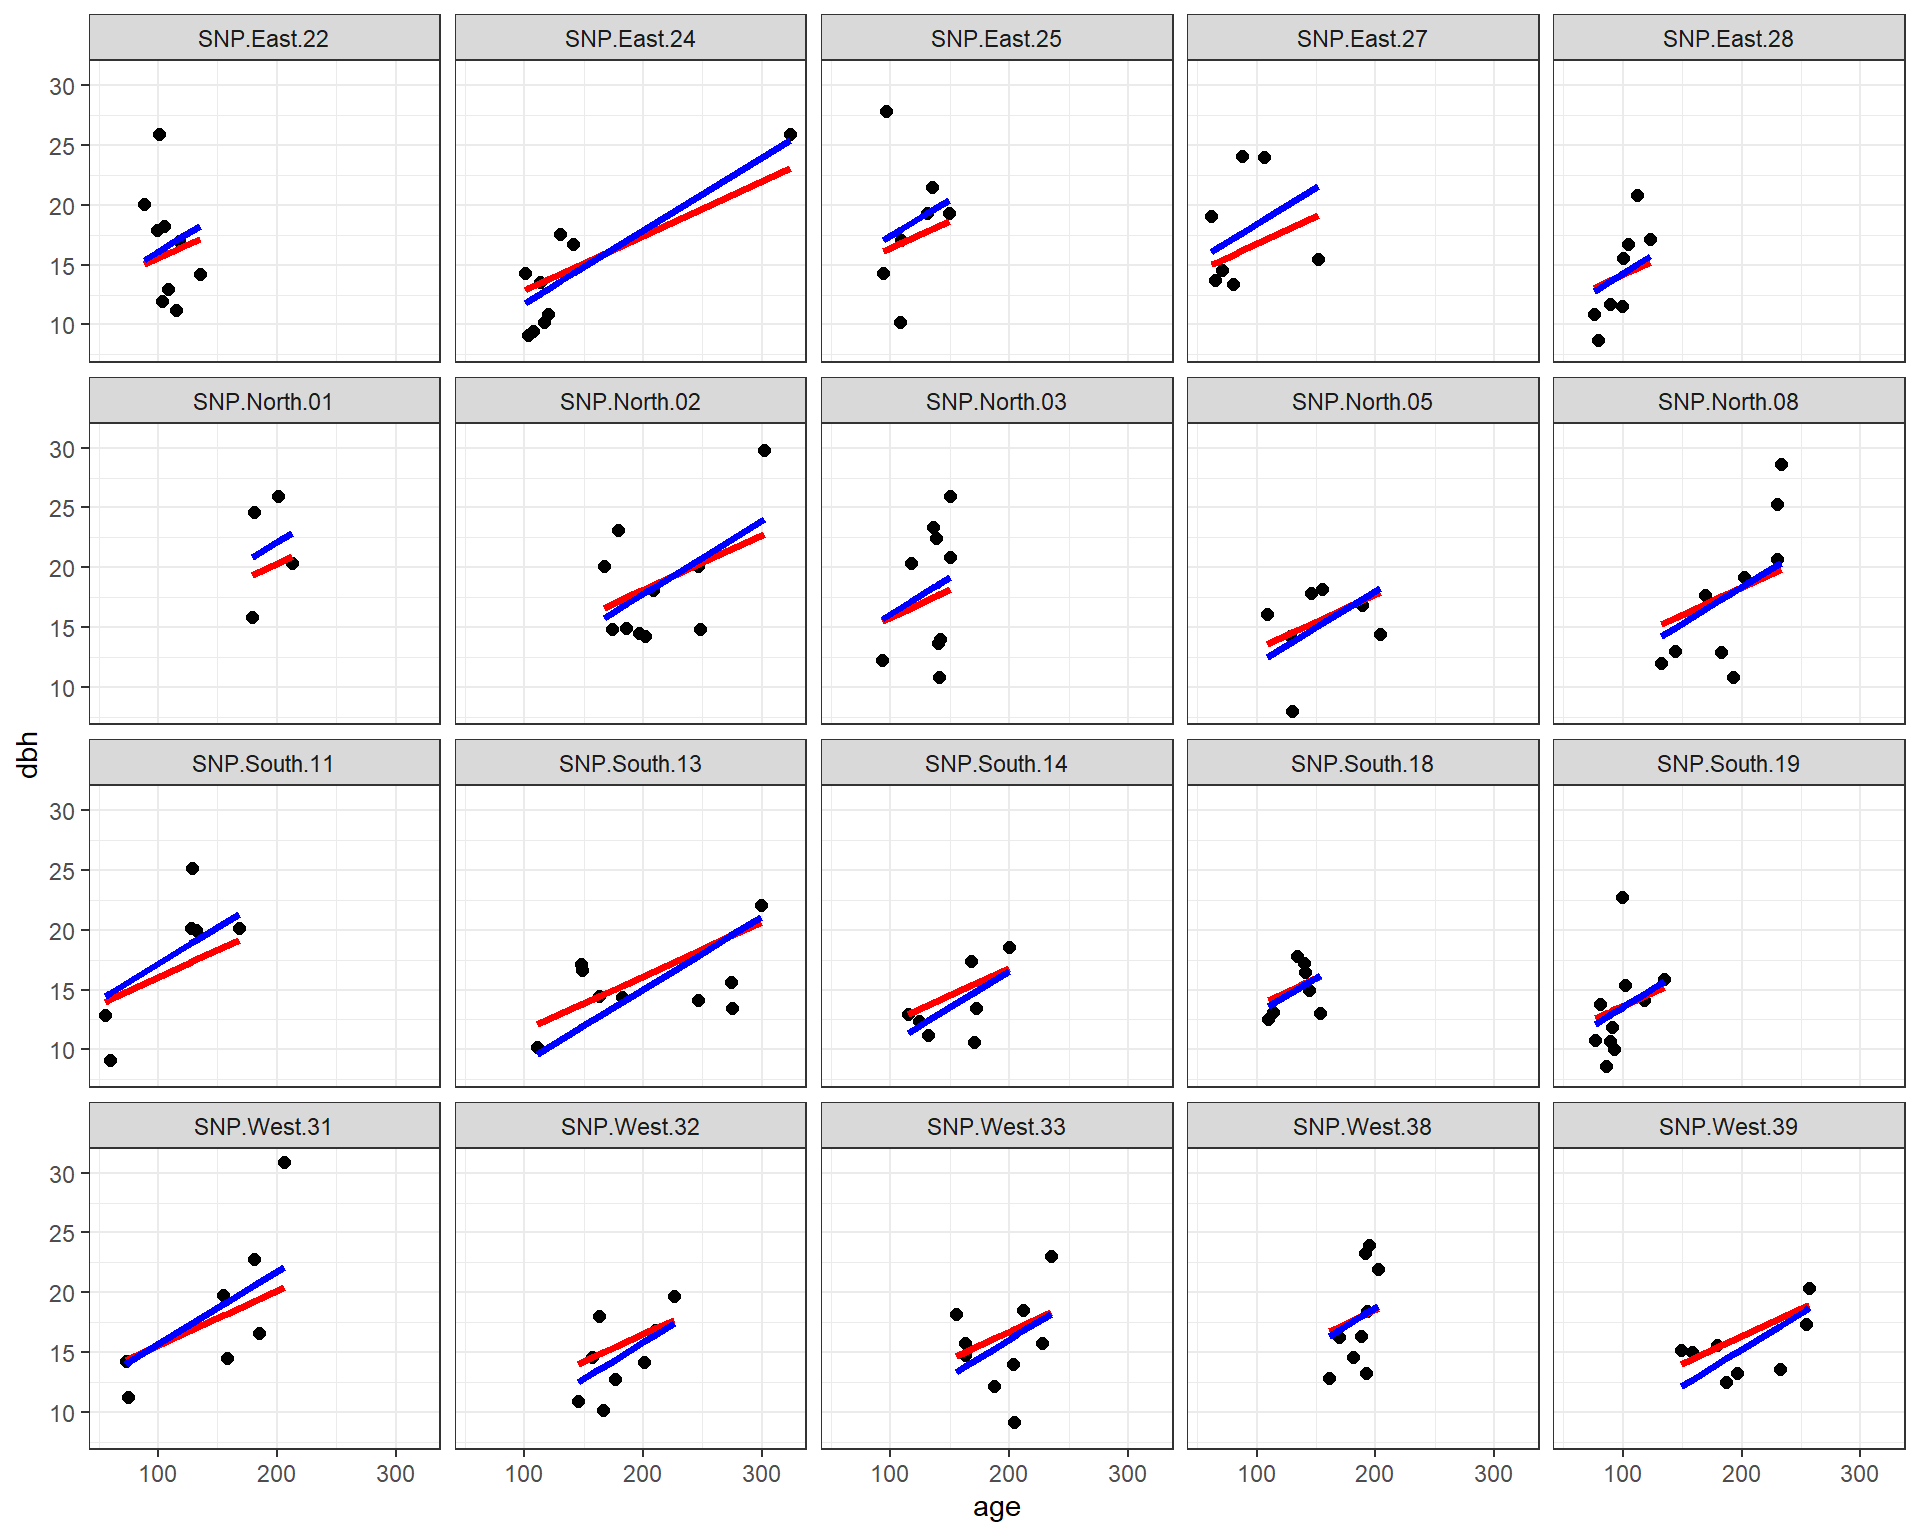 Fitted regression lines relating dbh to tree age using a fixed-effects (only) model and a mixed-effects model with random intercepts. In both cases, the effect of age is assumed to be constant across sites.